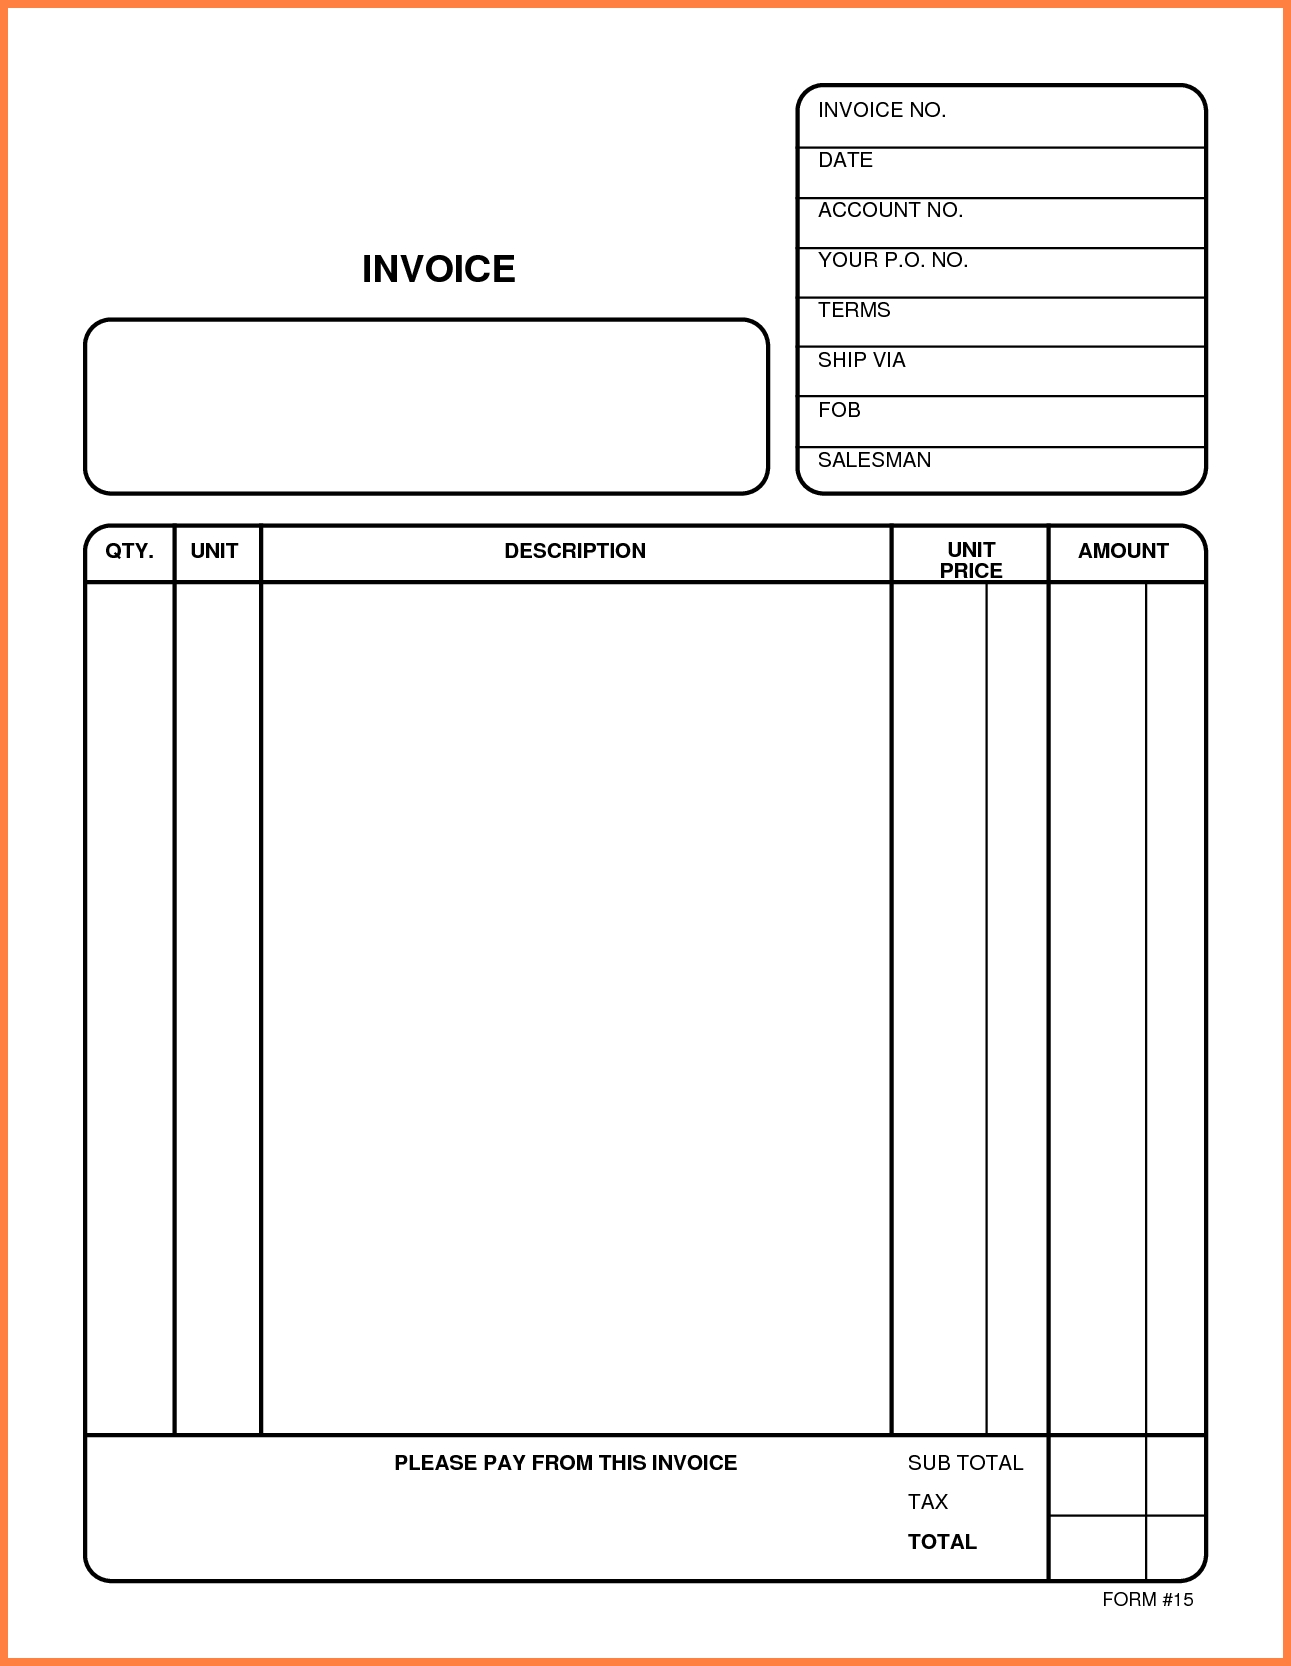 invoice forms free invoice forms online